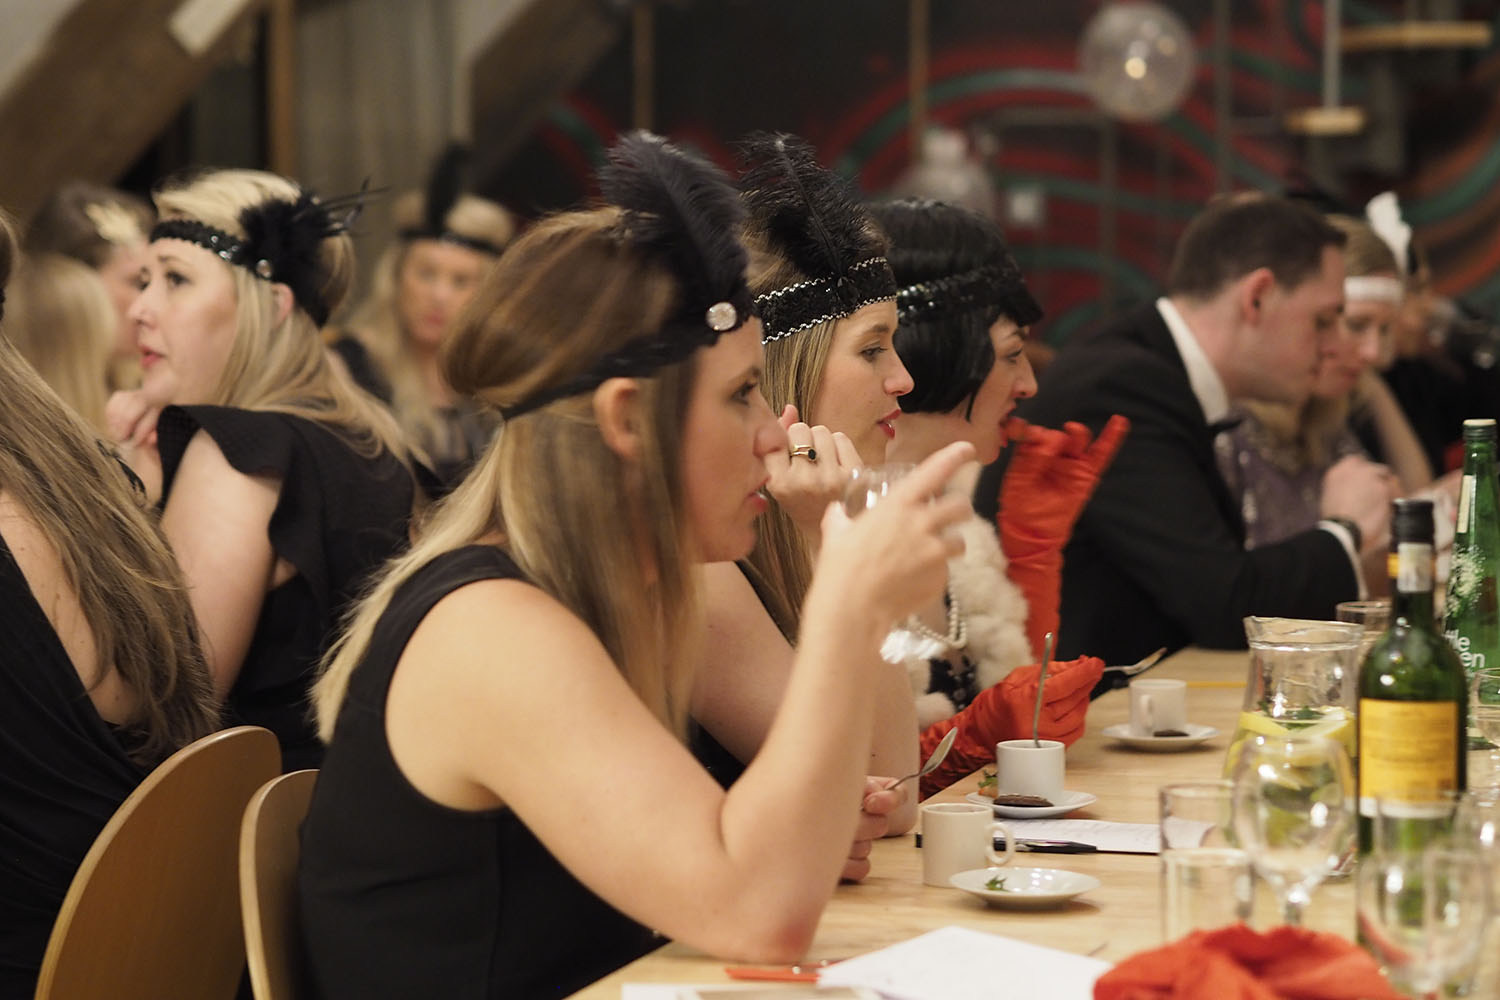 MURDER MYSTERY  How about solving a murder mystery at Mill End Mitcheldean – Up to 40 guests, with 5 actors, a great plot and a 3 course dinner.